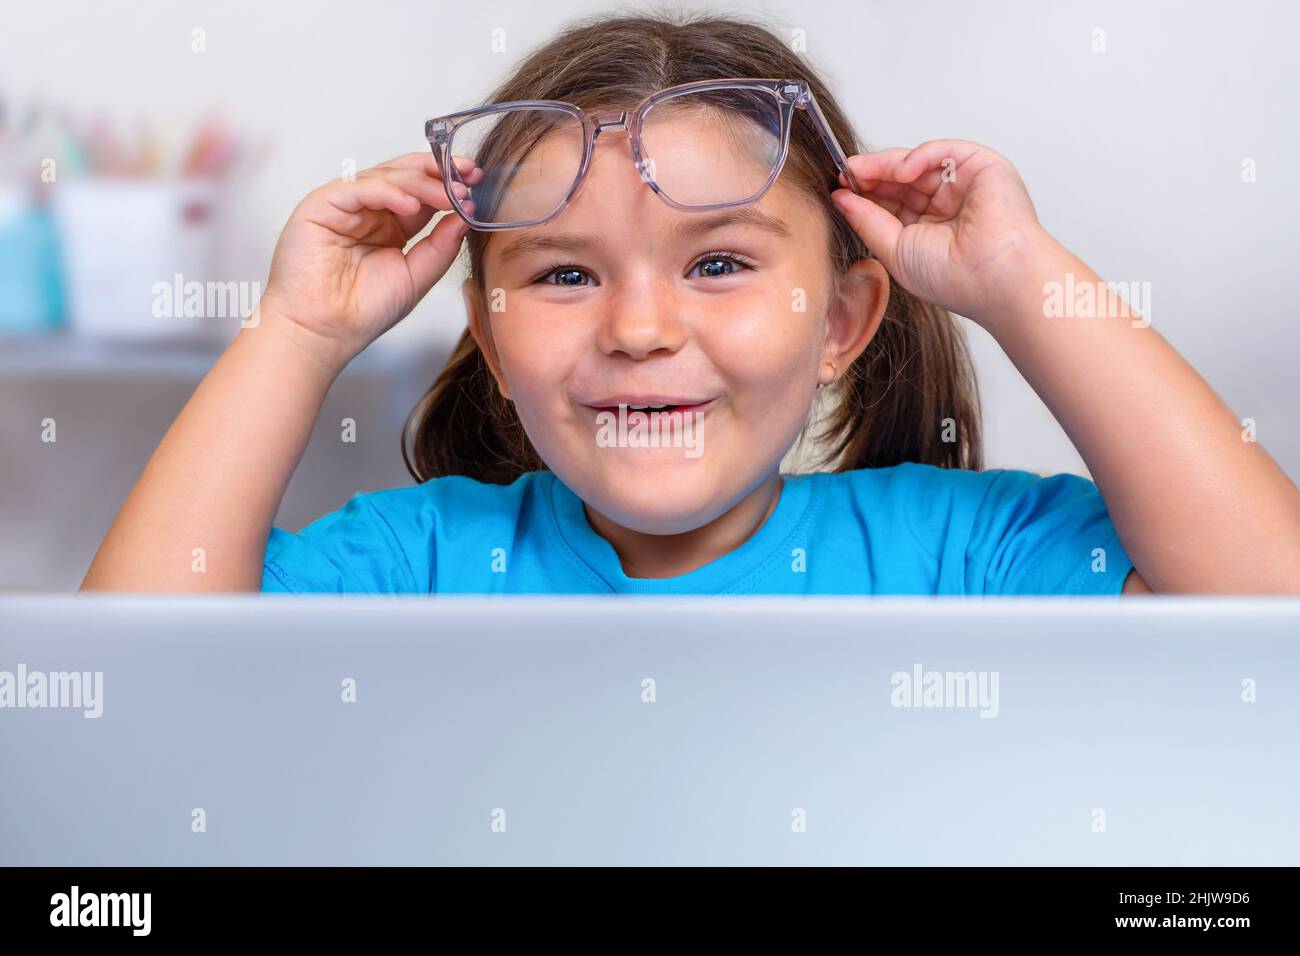 Portrait of the child in eyeglasses peeking in surprise from behind a laptop Stock Photo